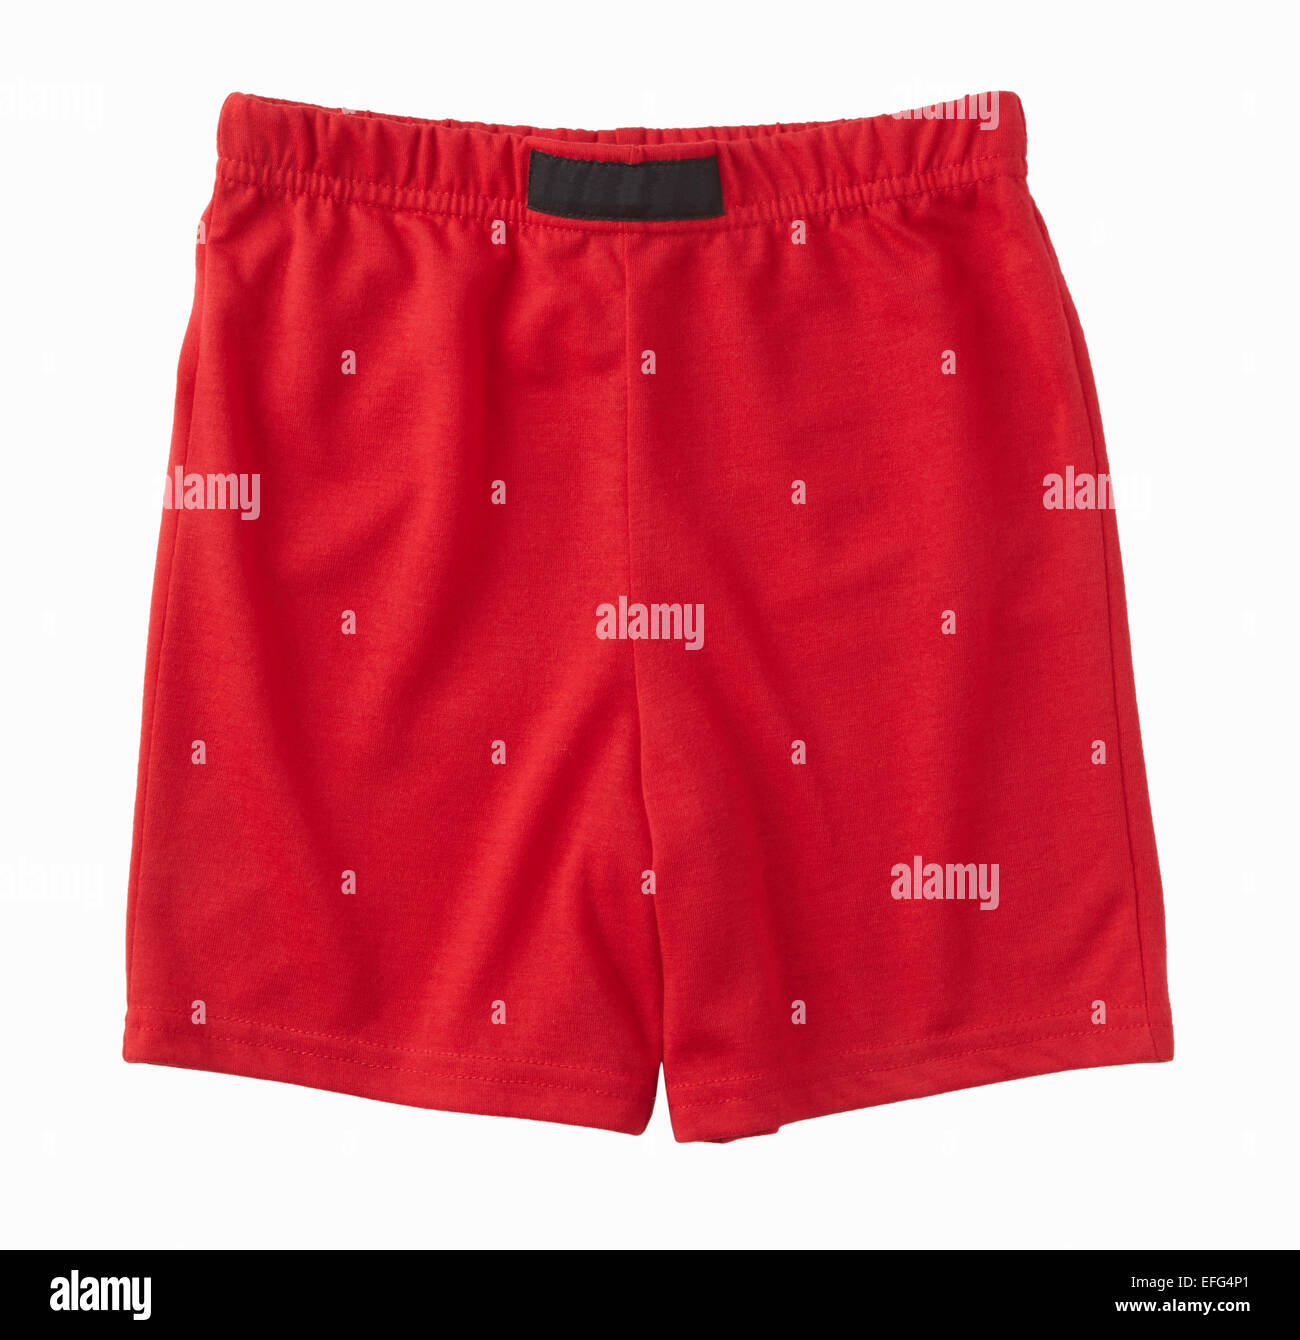 Red shorts Stock Photo